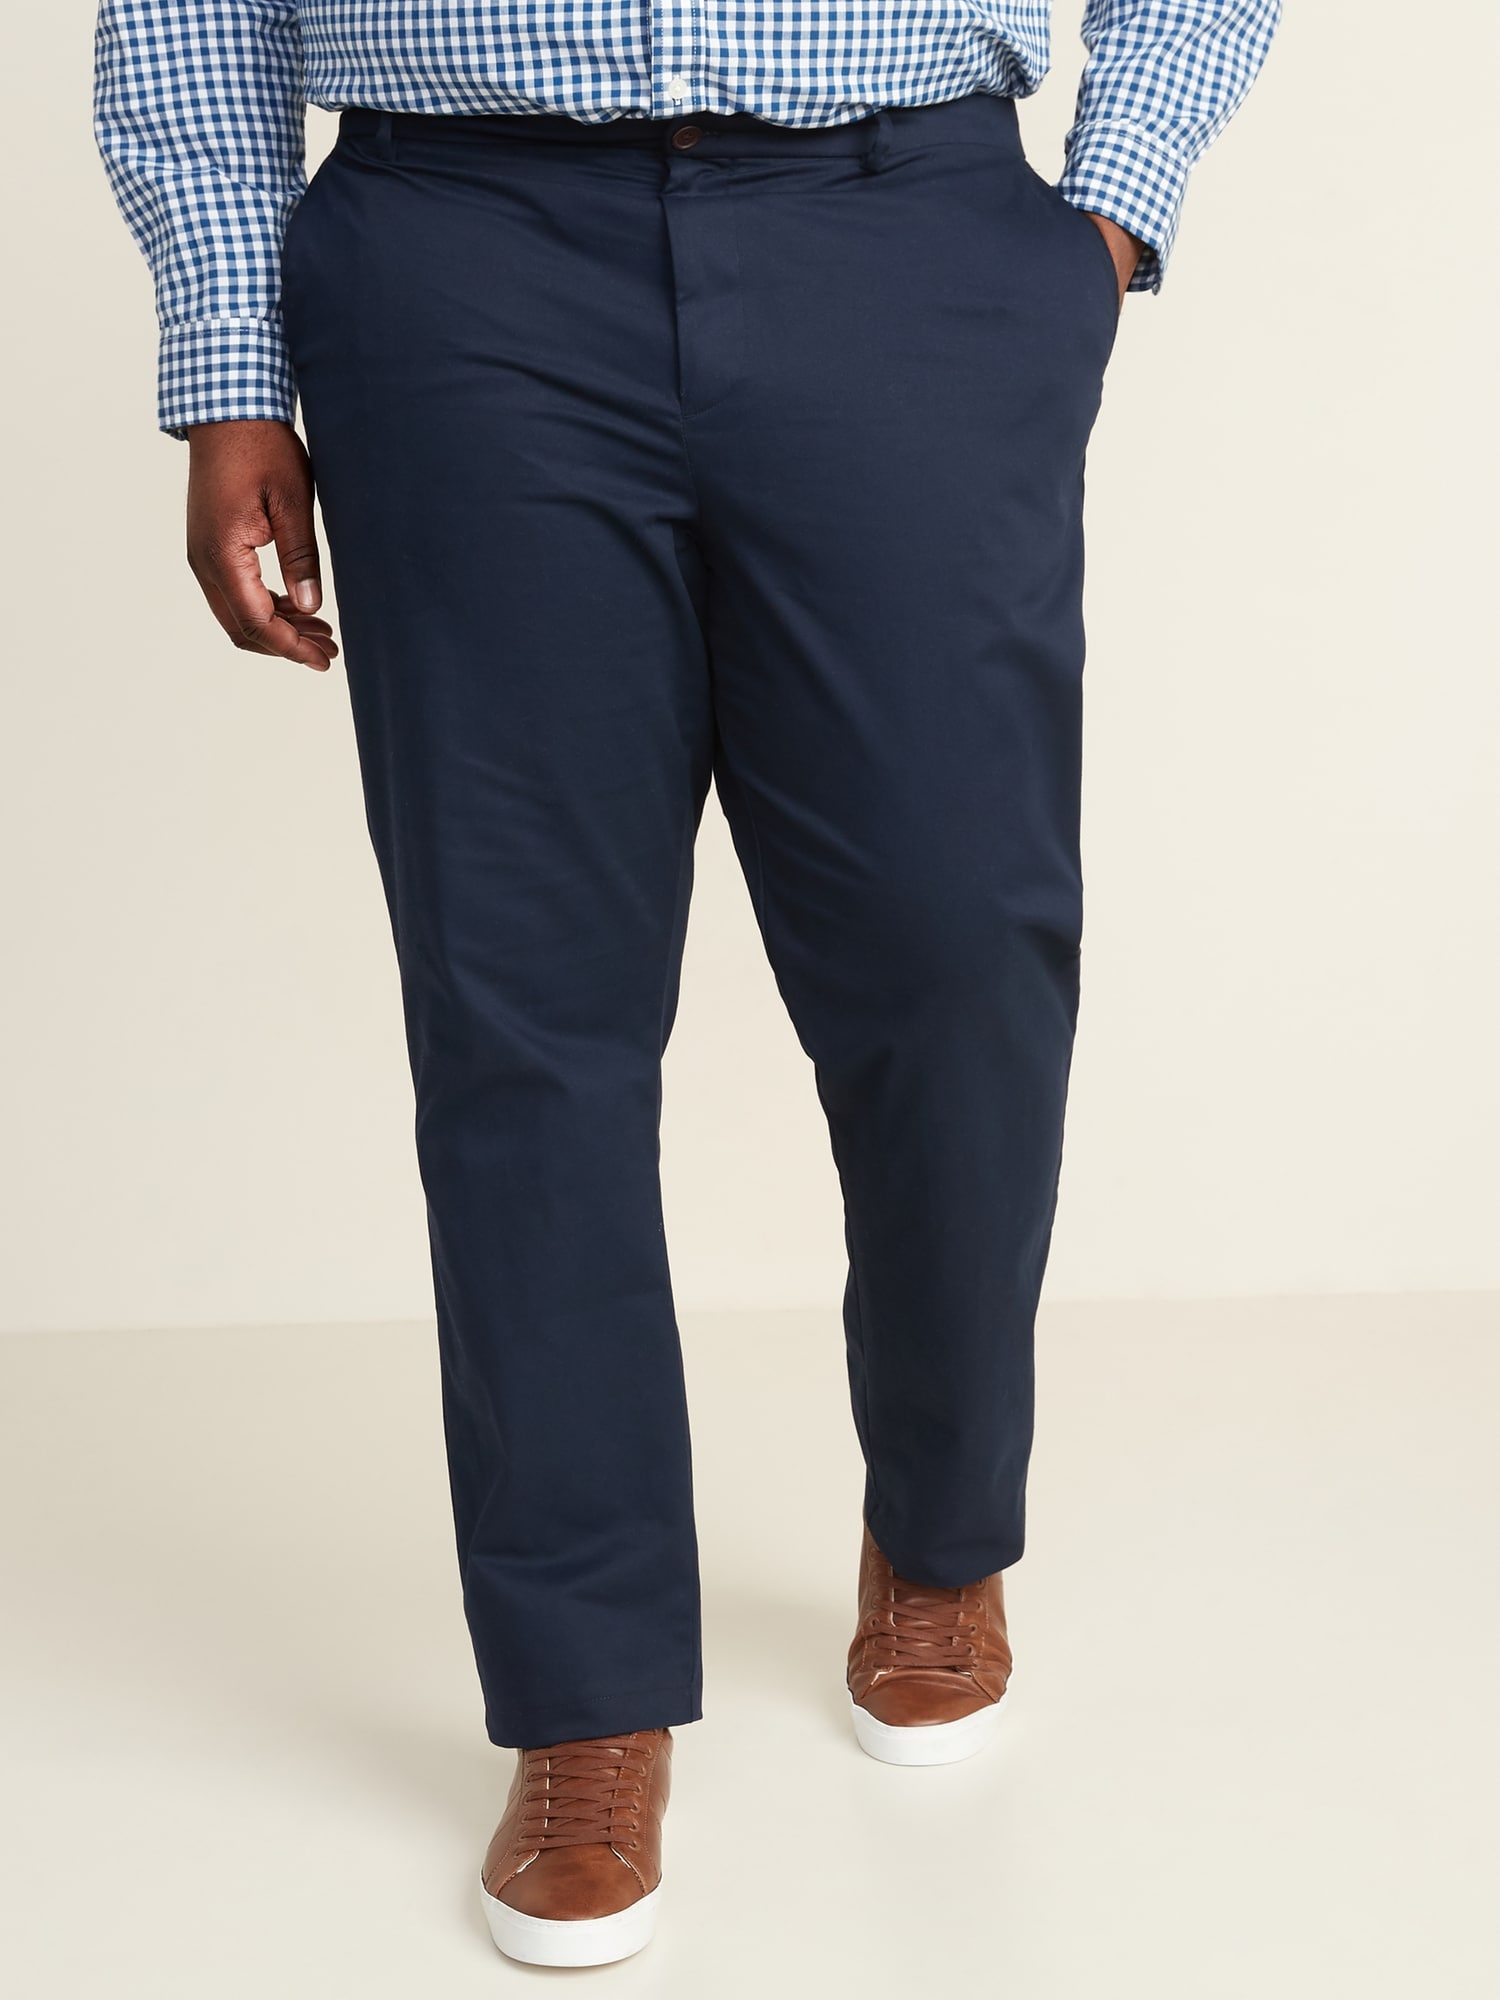 What To Wear With Navy Blue Chinos Men